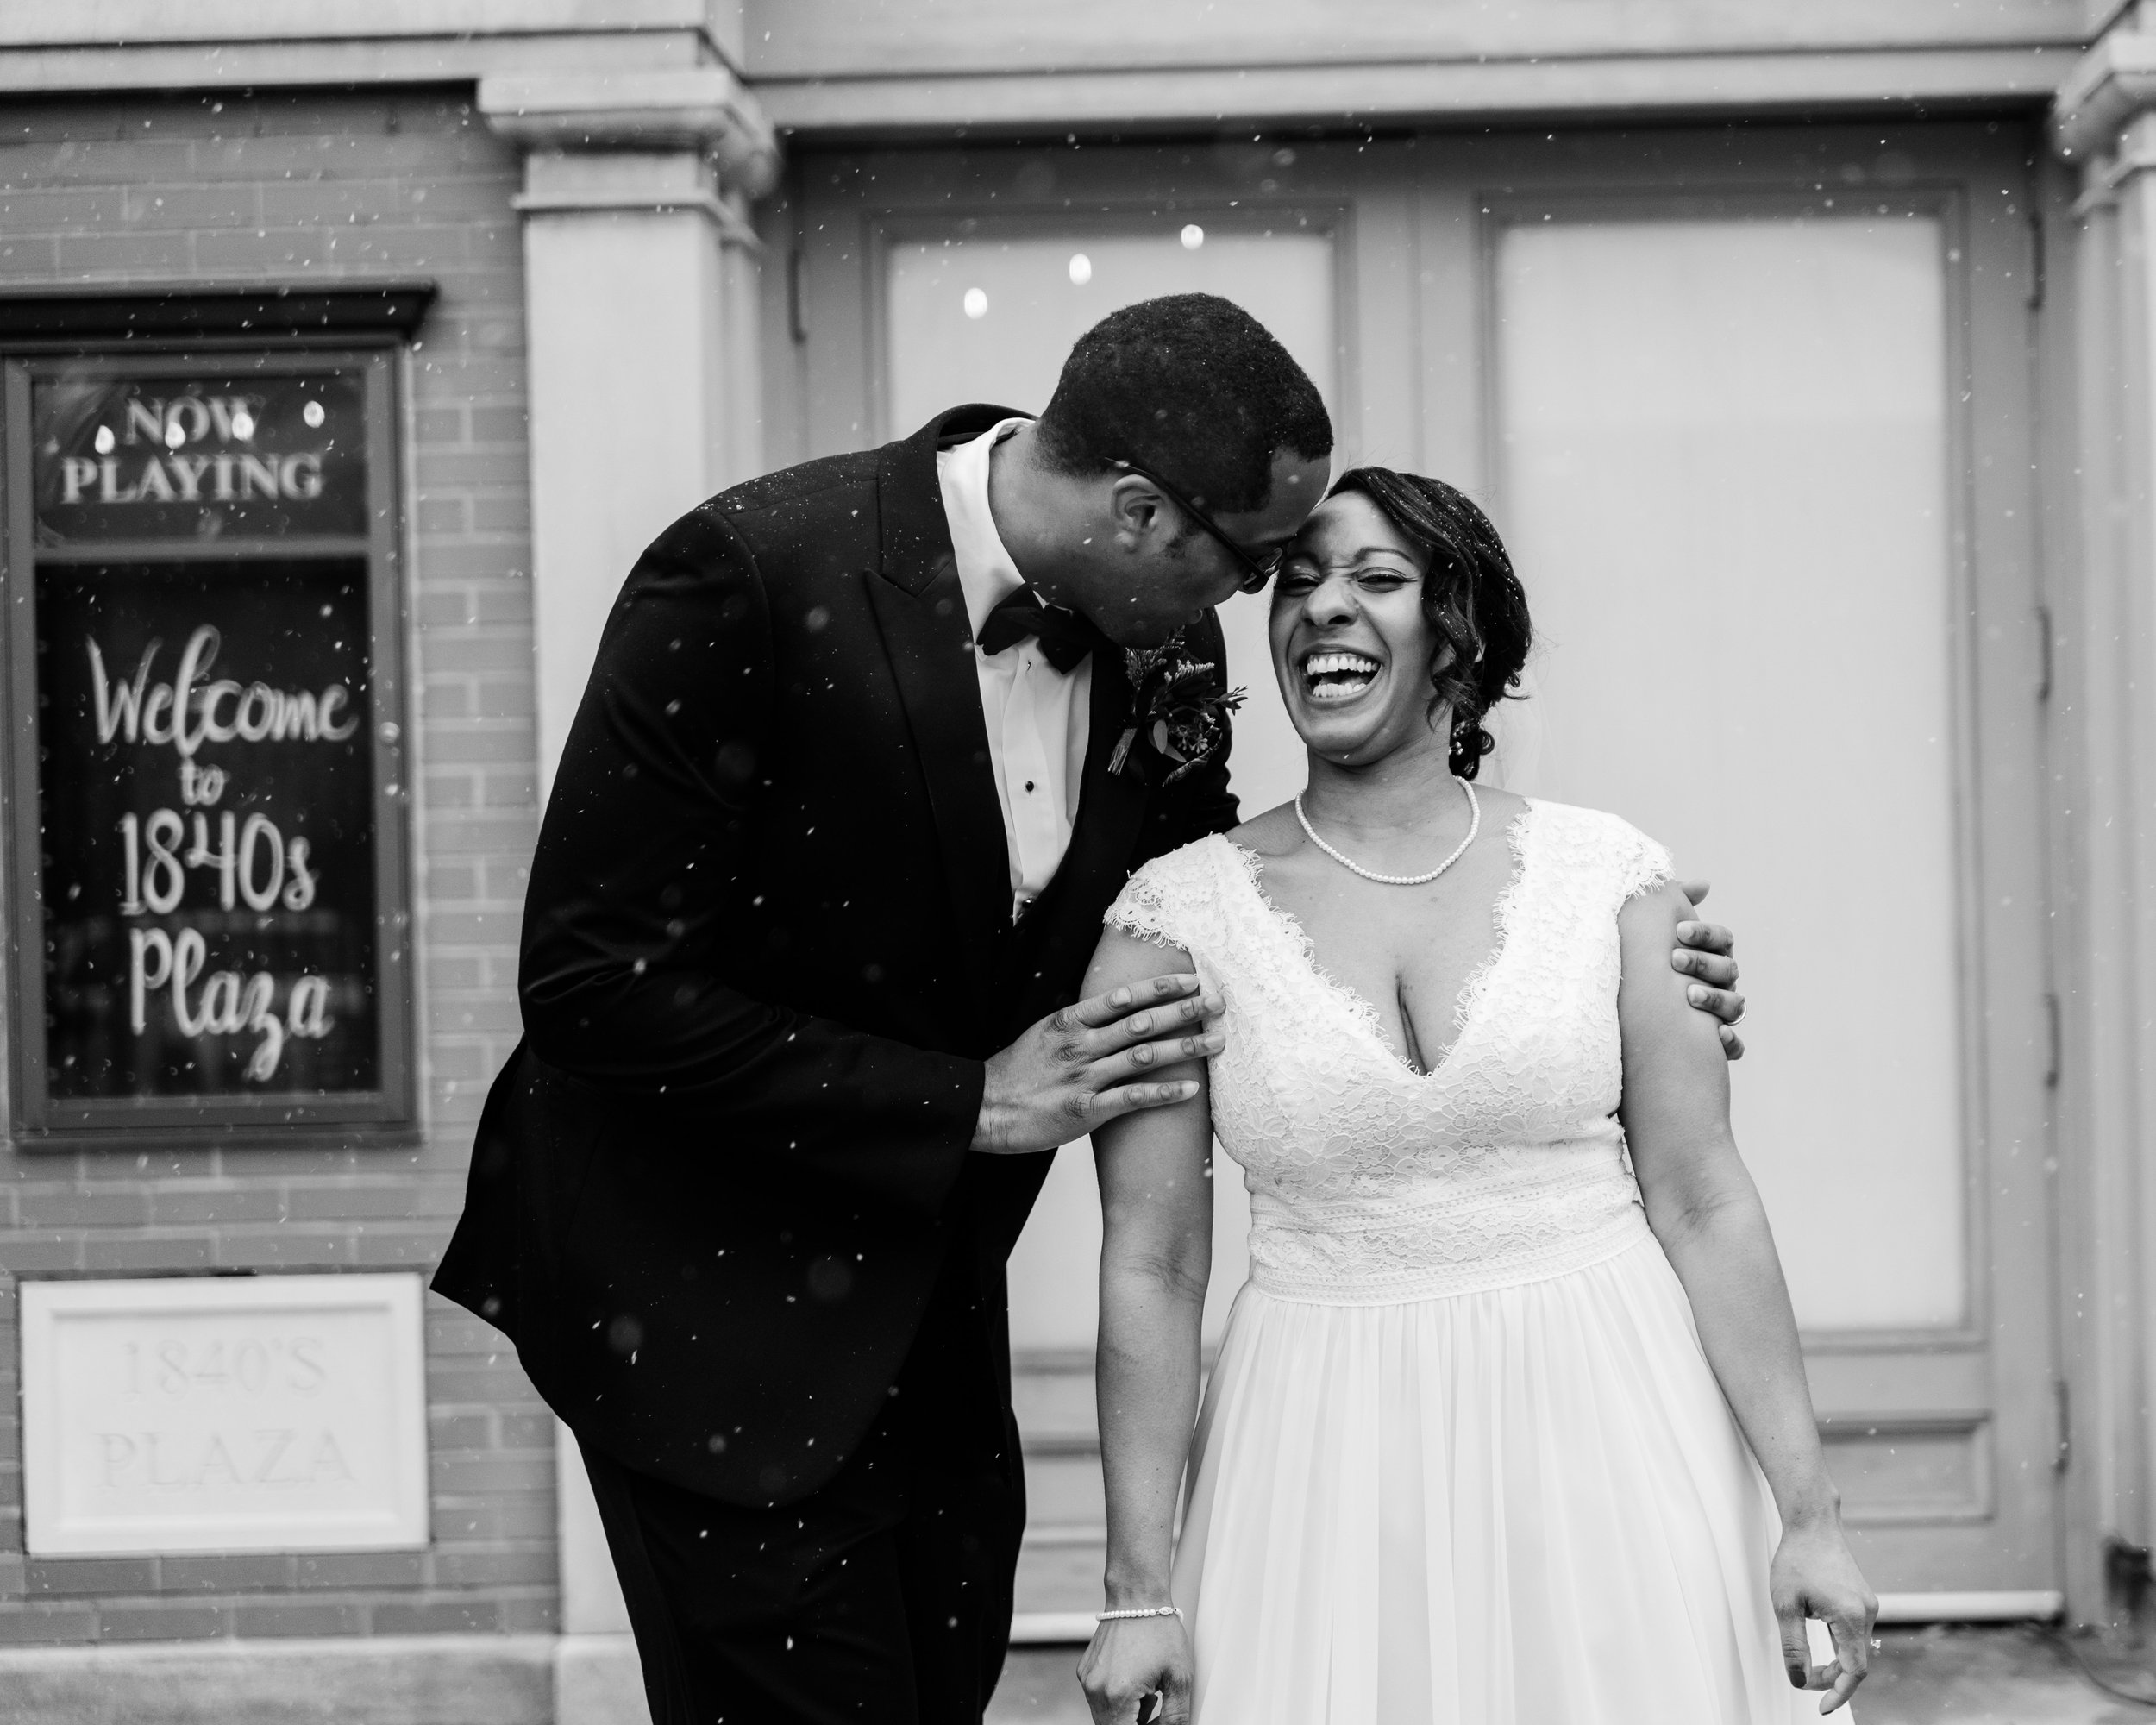 Snowy Winter Wedding at 1840's Plaza in Baltimore City Megapixels Media Photography-36.jpg